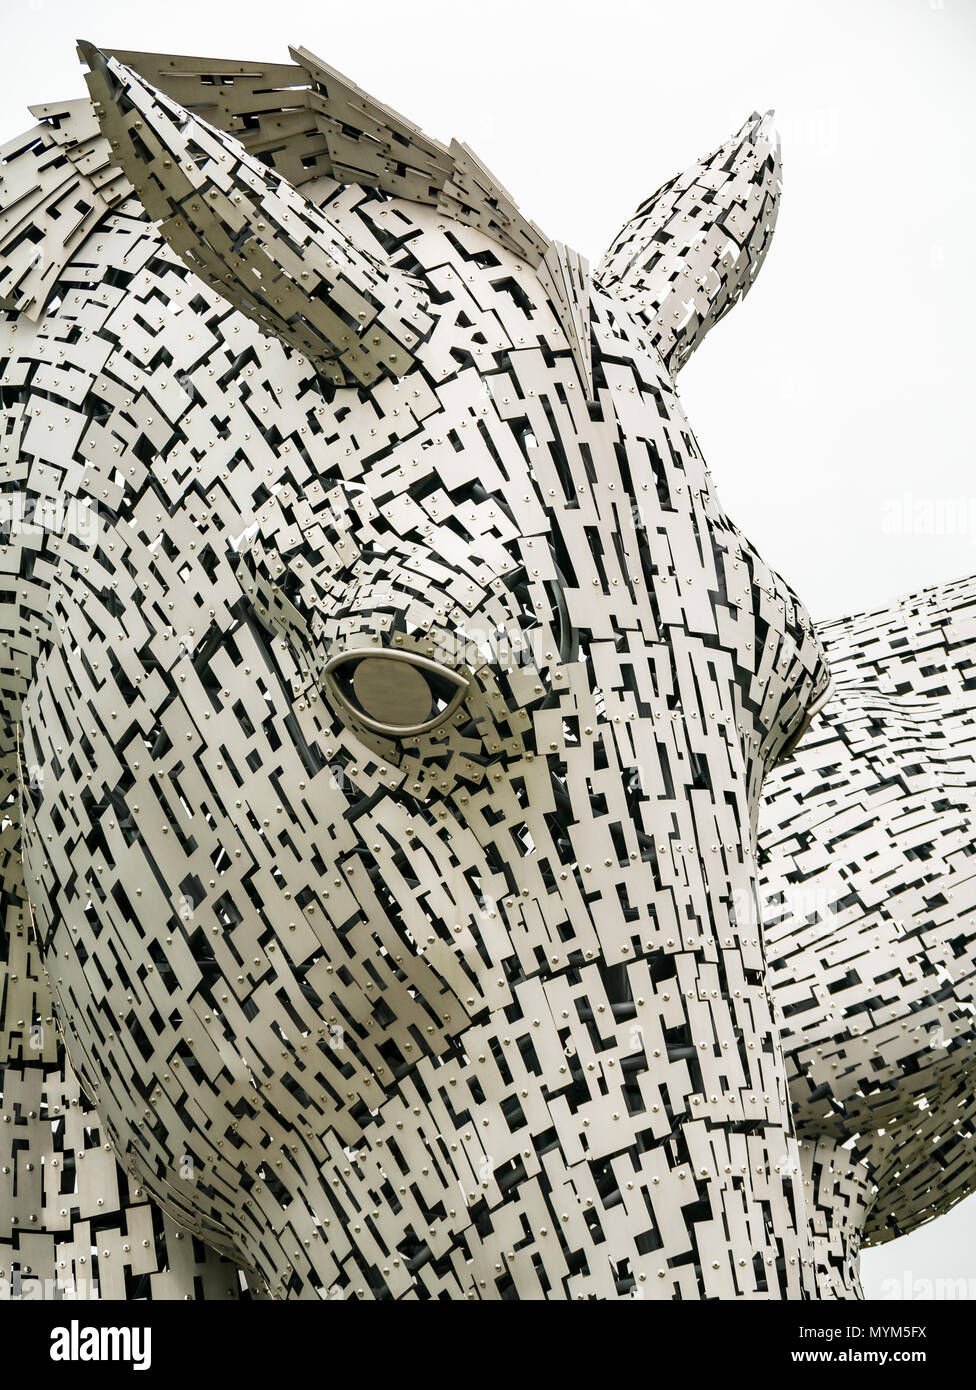 Close up of intricate metalwork horse head sculpture of Kelpie by Andy Scott, Helix Park, Falkirk, Scotland, UK Stock Photo